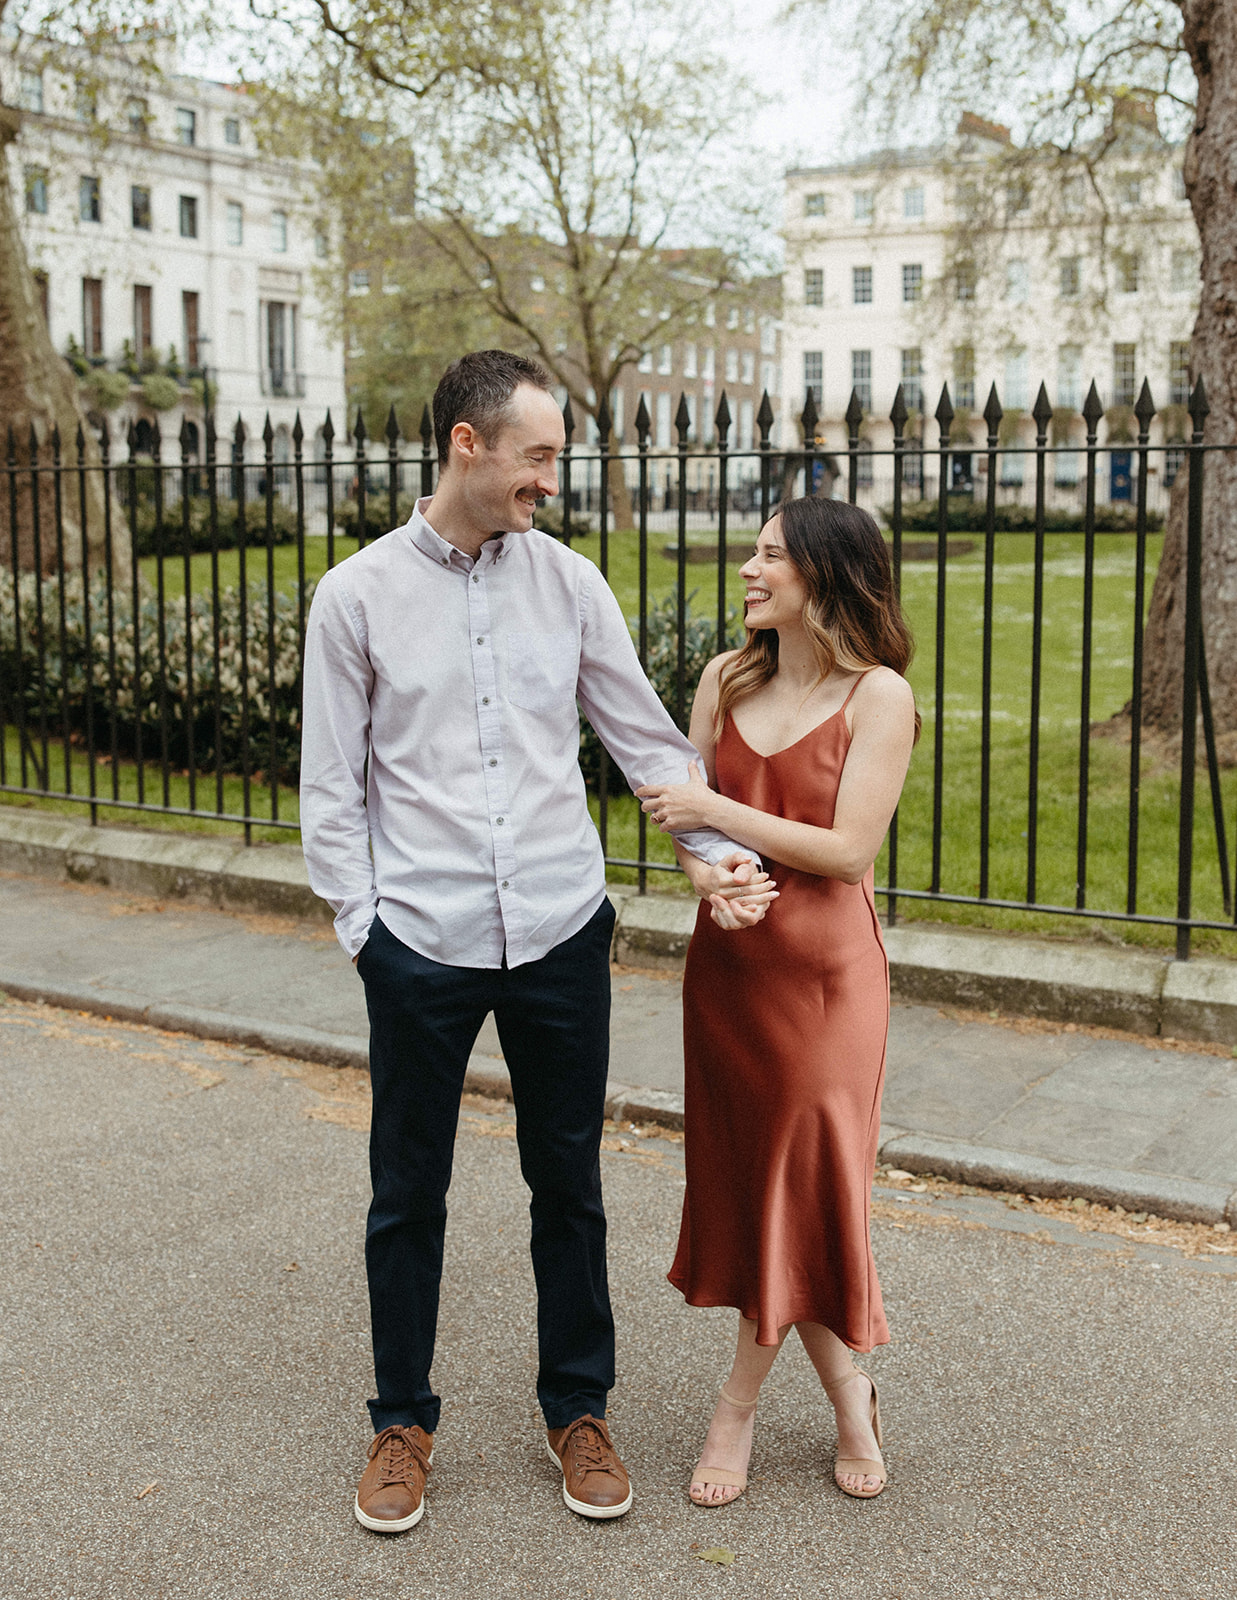 A man and his fiancée hold hands tightly during their engagement session in London.